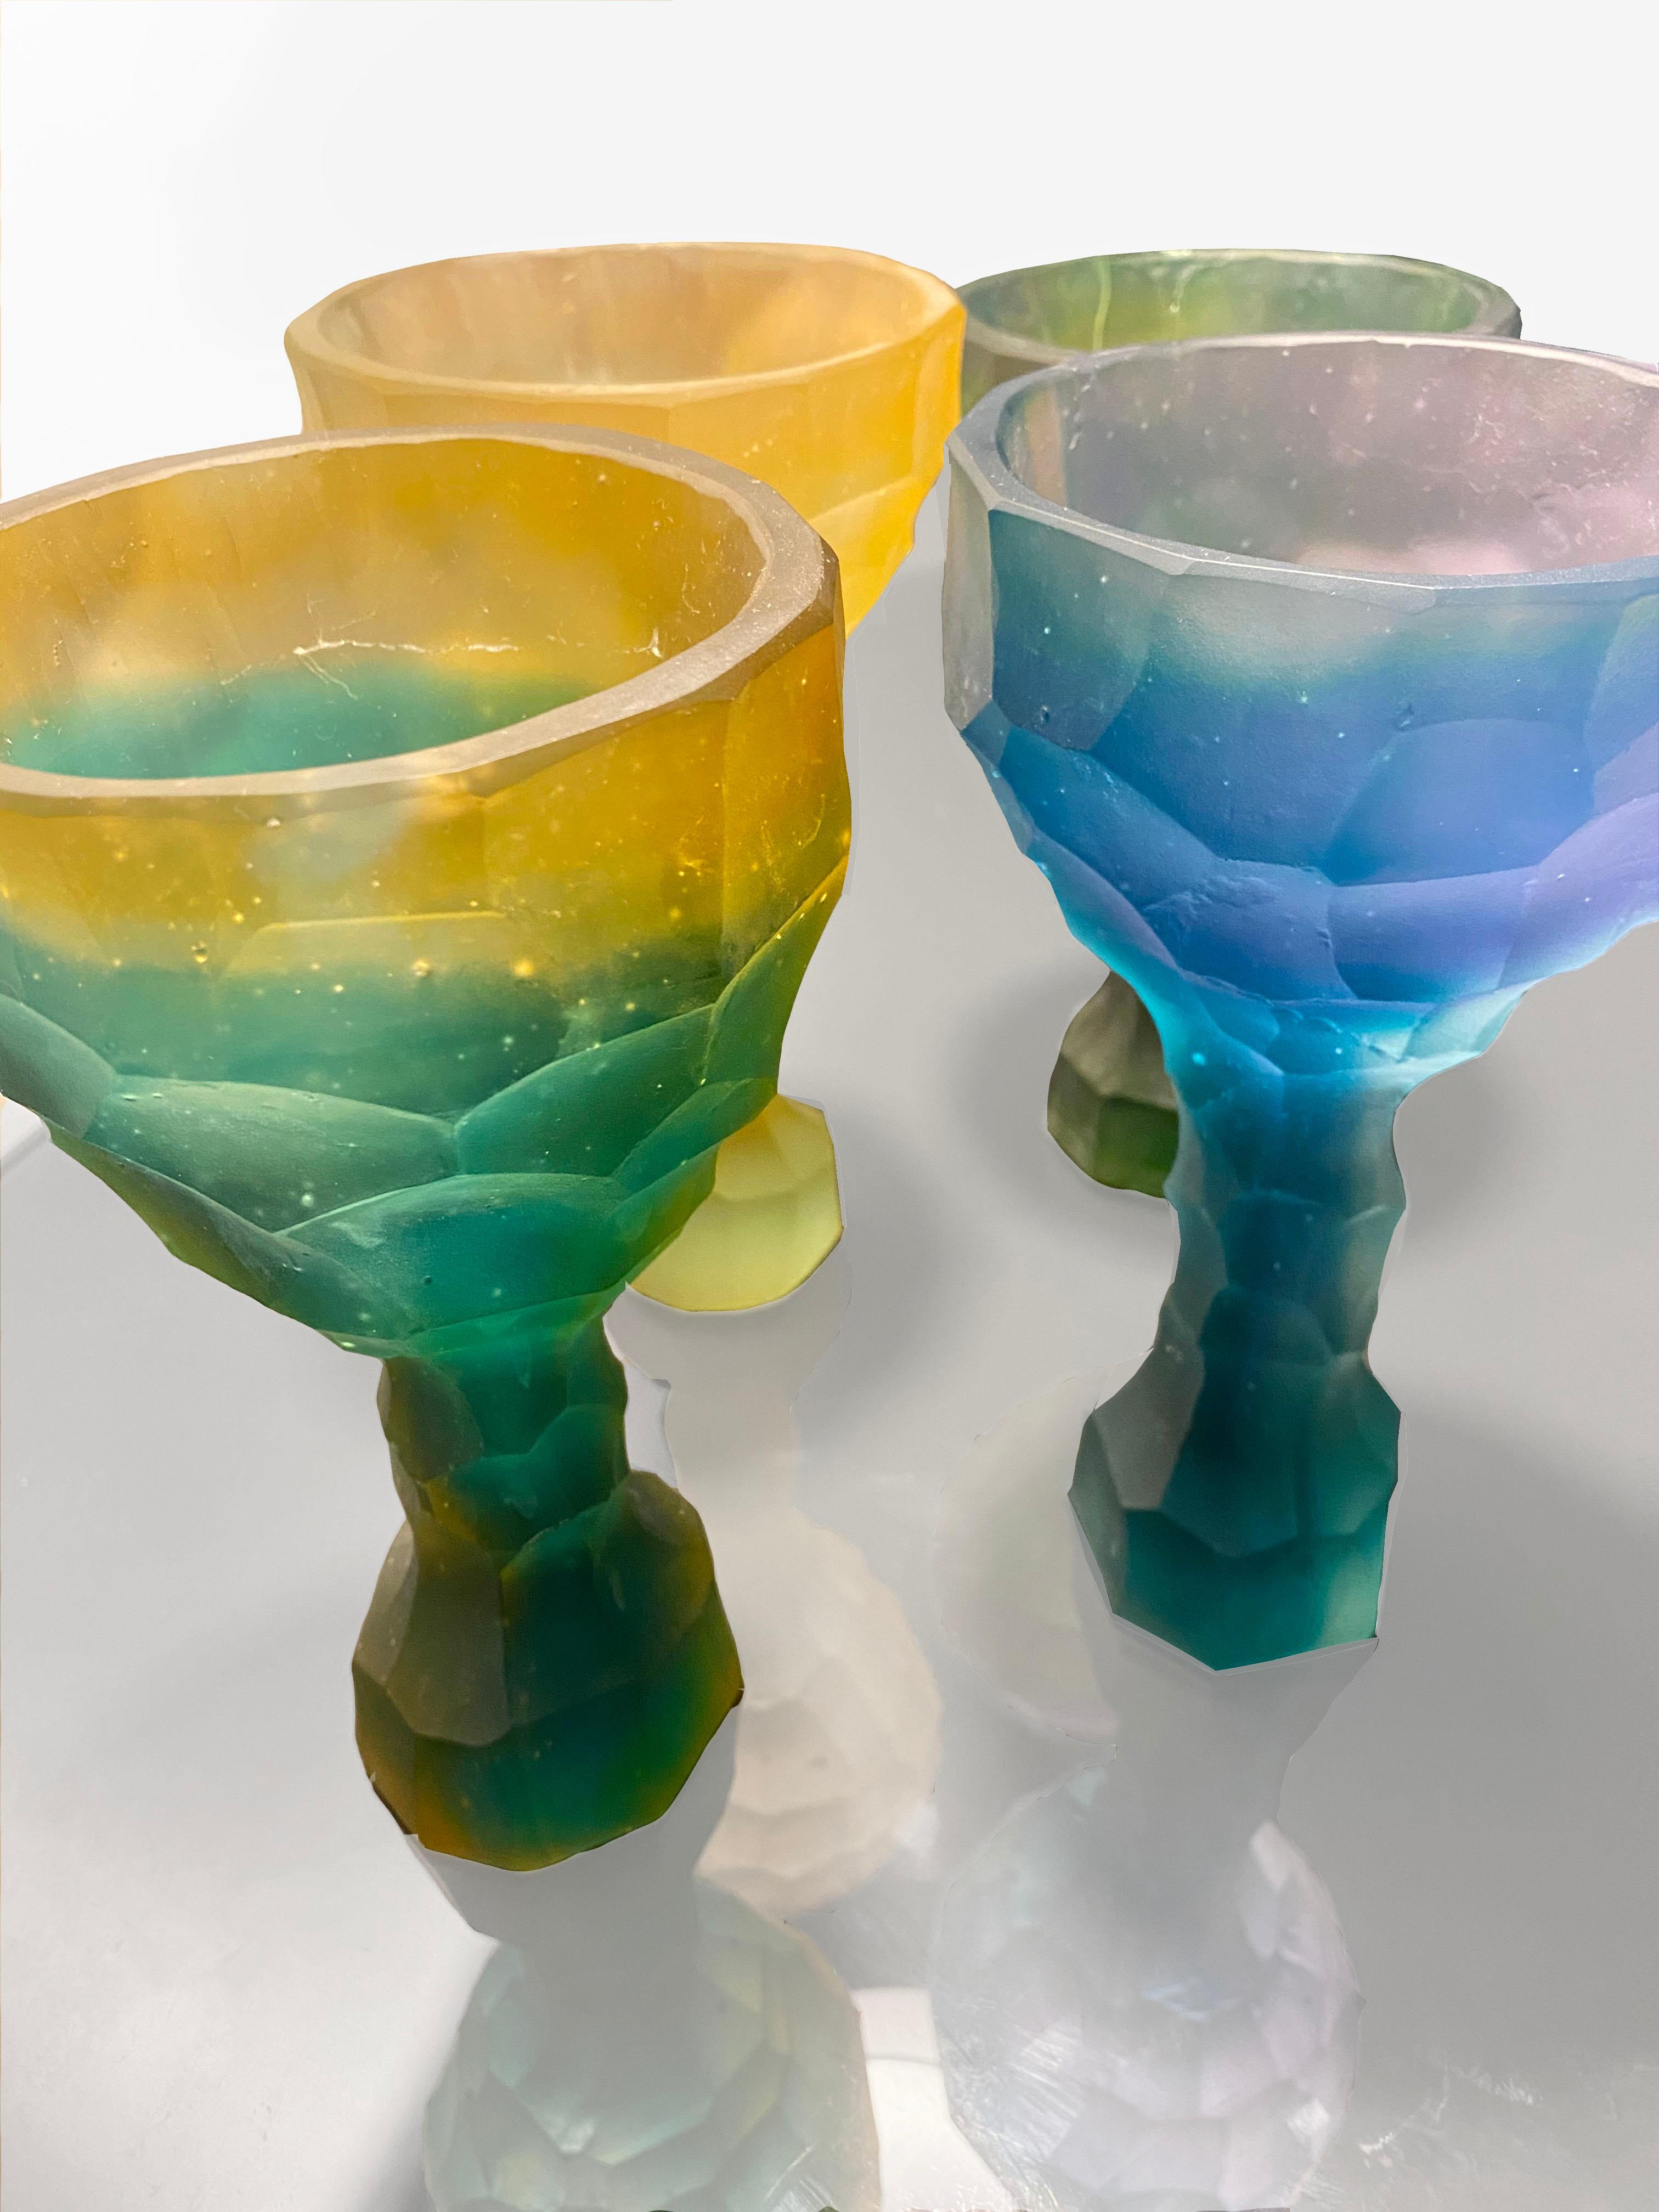 Green and Orange Hand-Sculpted Crystal Glass by Alissa Volchkova 1